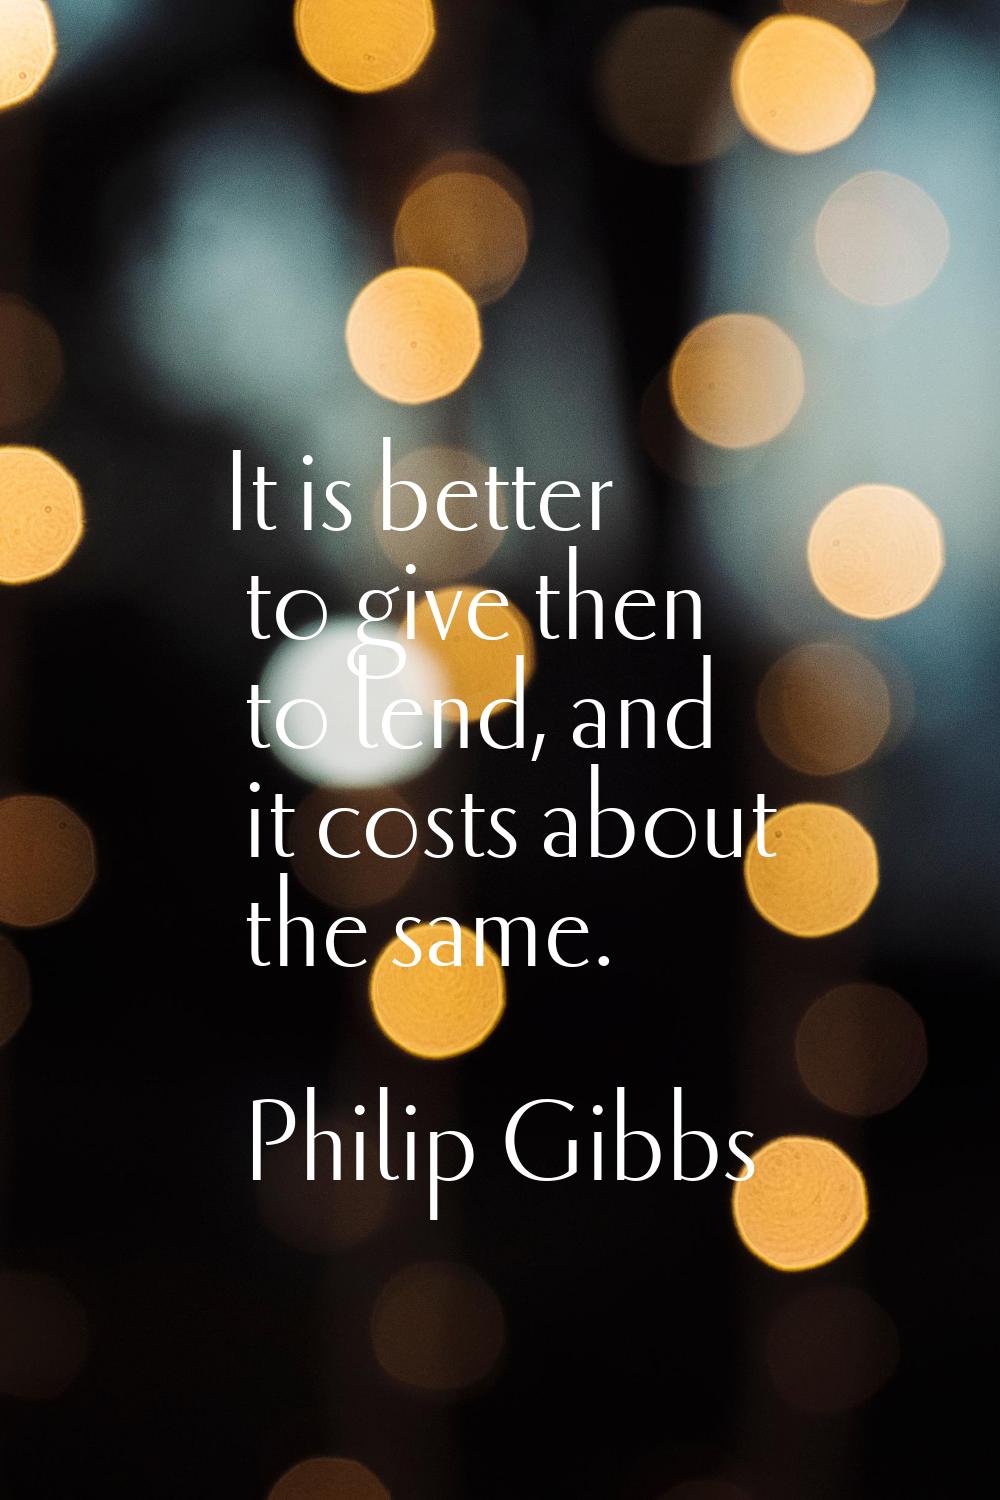 It is better to give then to lend, and it costs about the same.